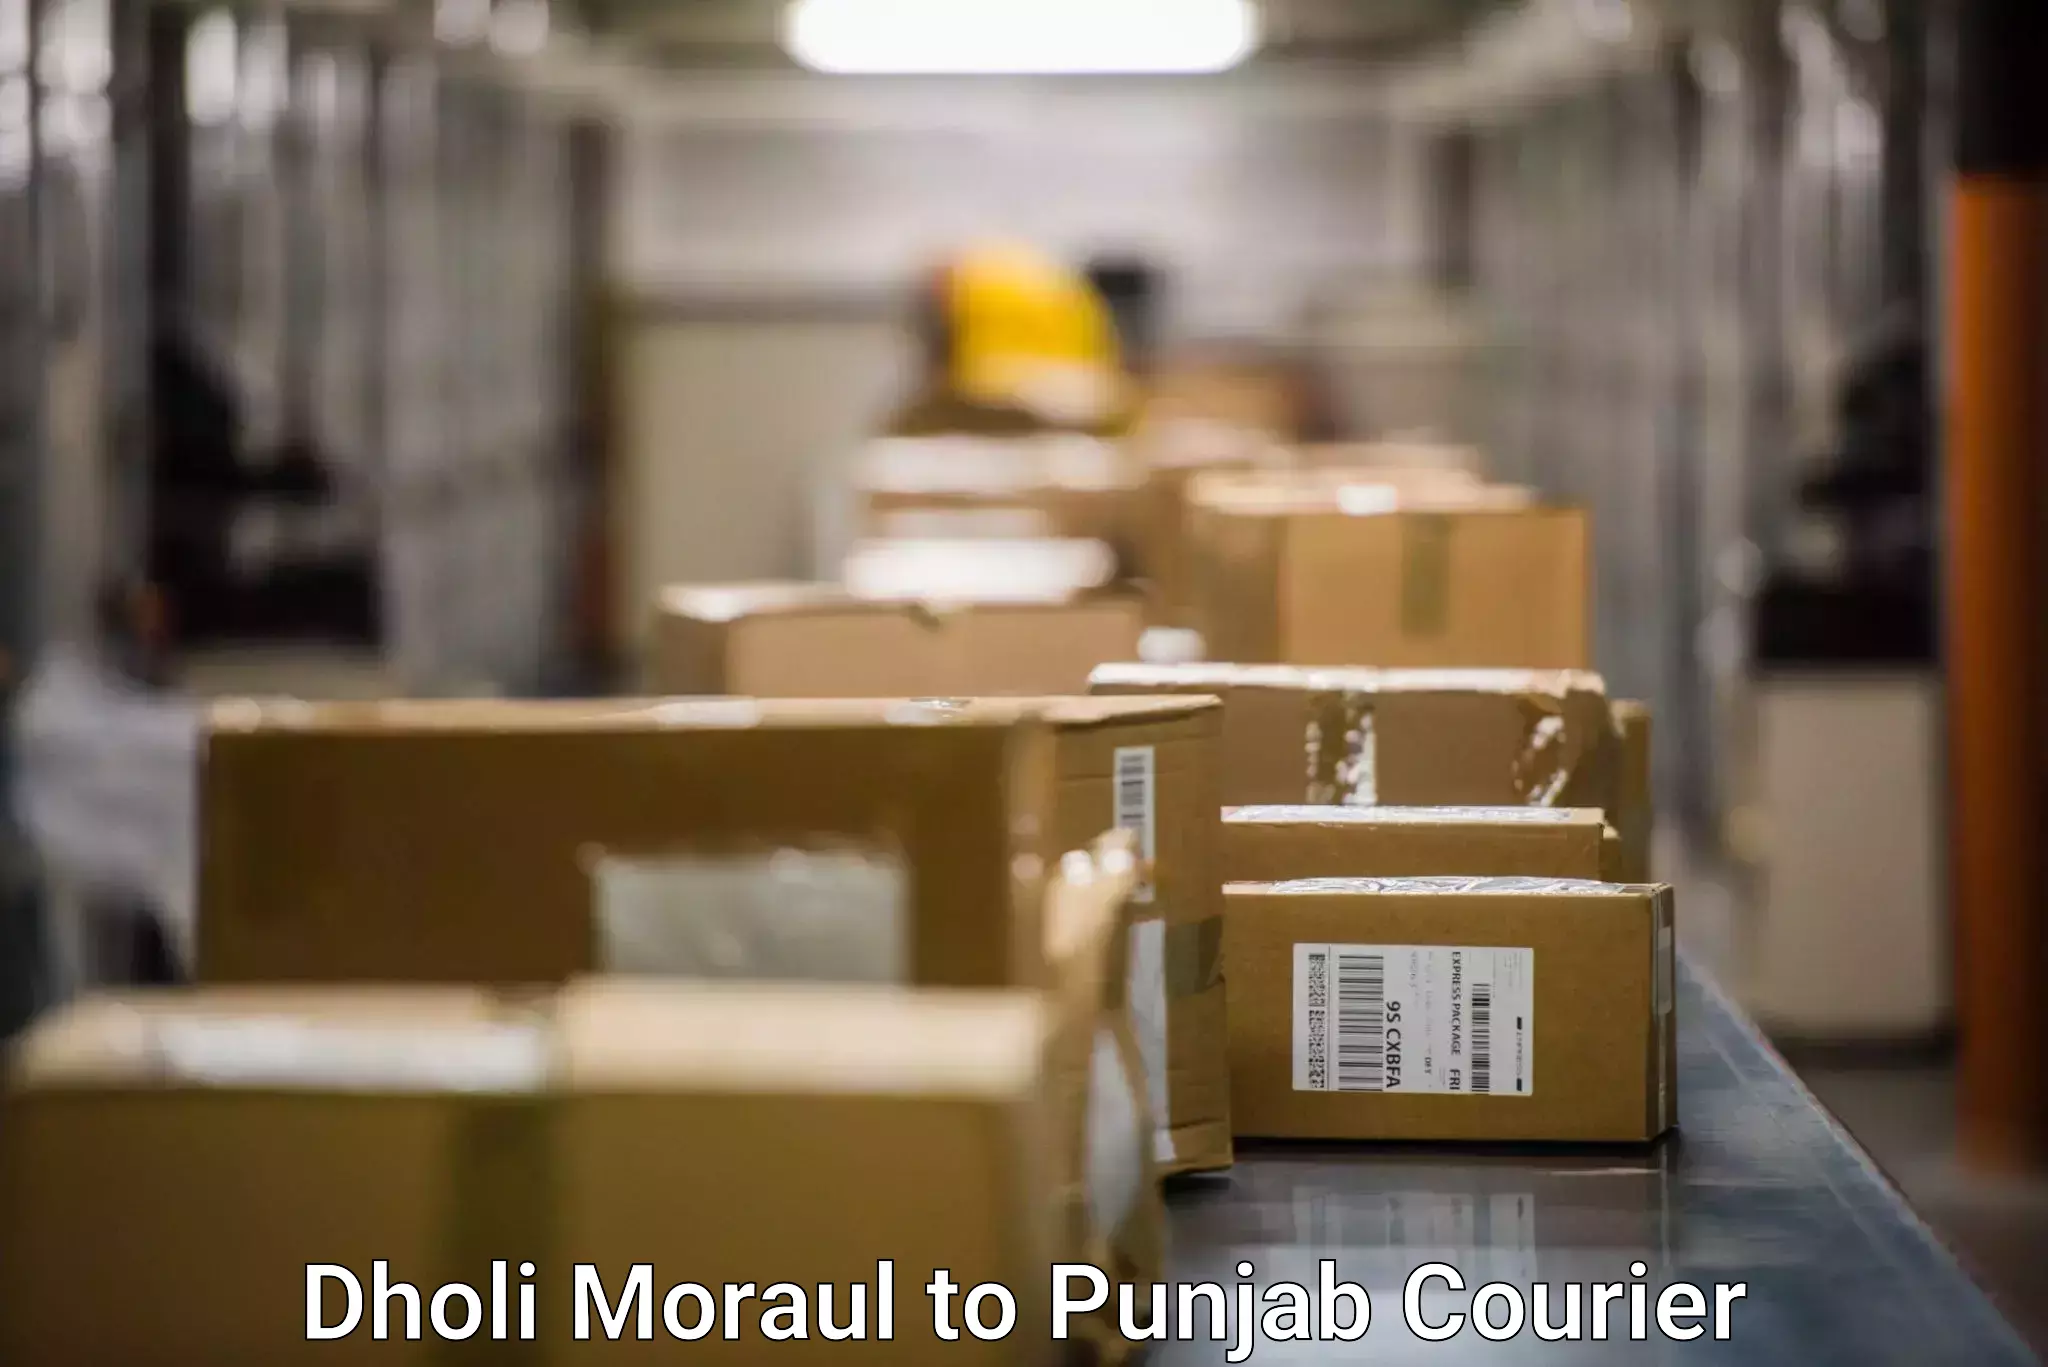 Large package courier Dholi Moraul to Punjab